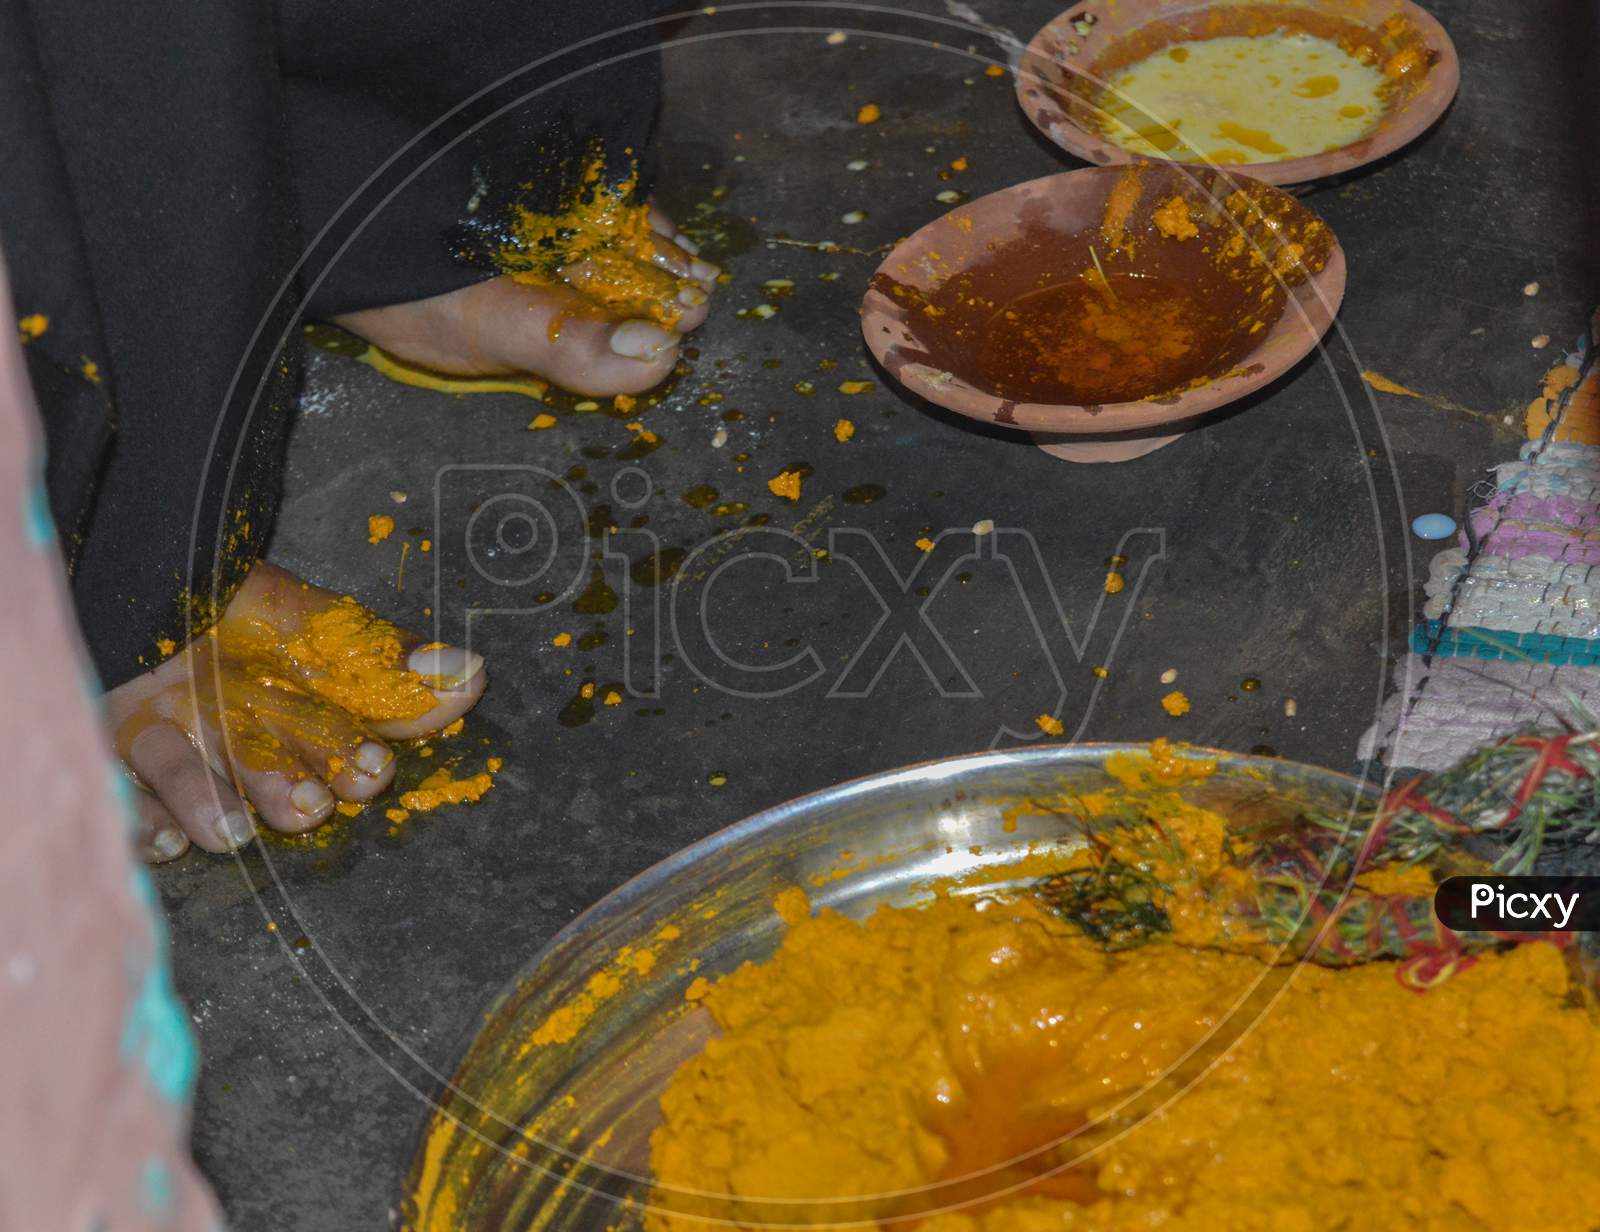 Closeup Shot Of Bride Feet On Haldi(Turmeric) Ceremony In One Of The Ritual In Indian Marriage.